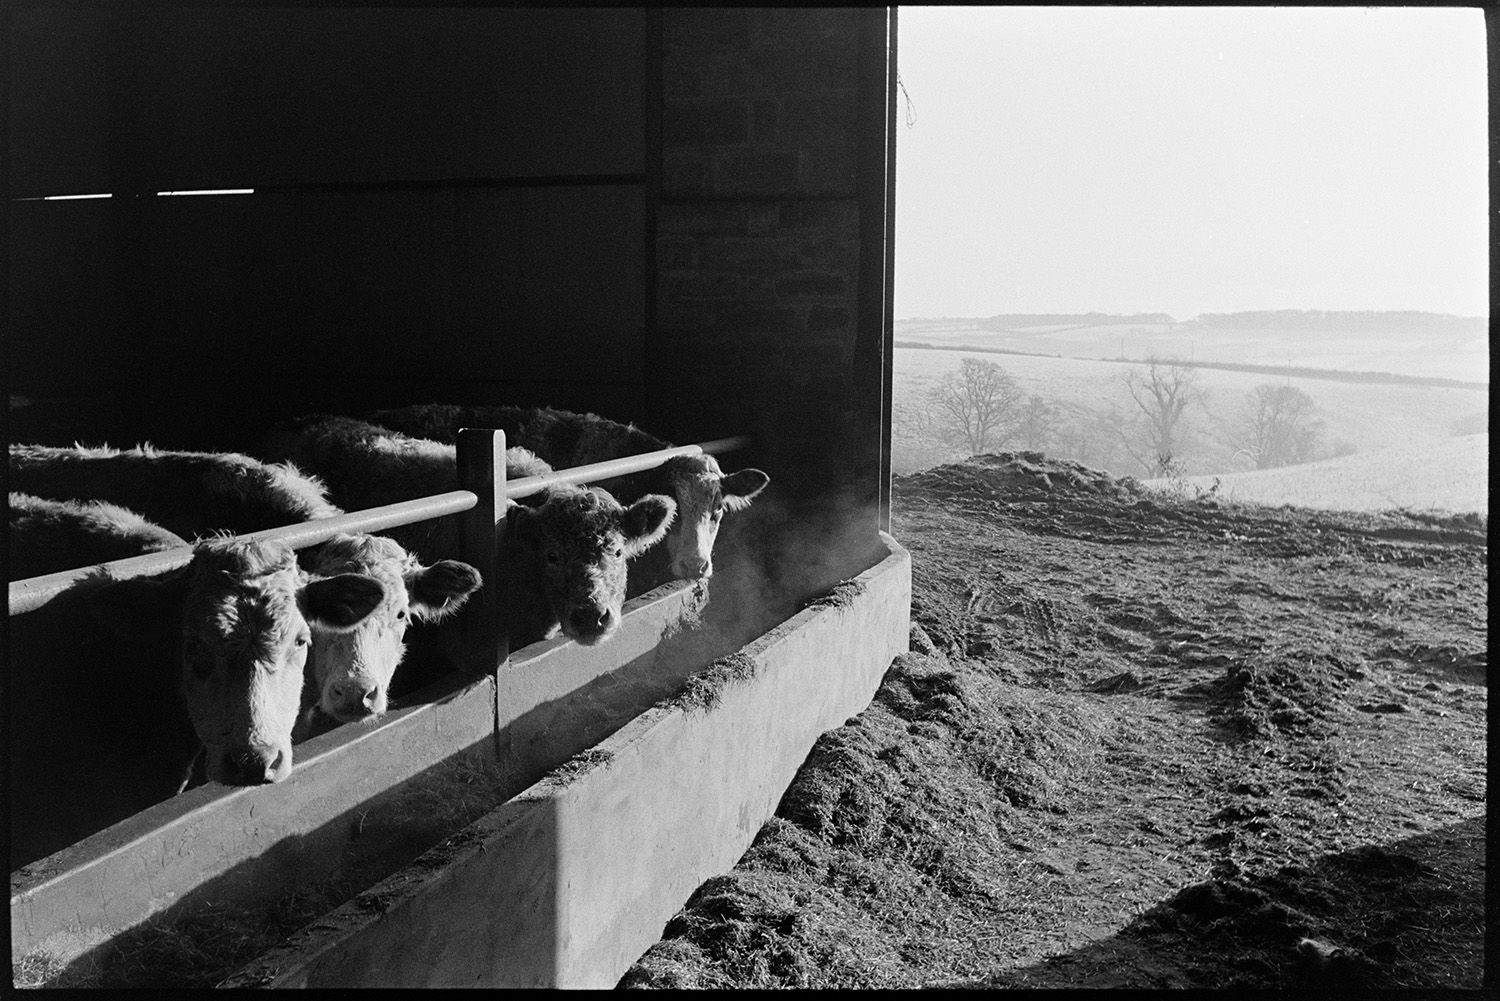 Cattle in a barn eating from a trough, possibly at Parsonage Farm, Chulmleigh. Fields and trees can be seen outside the barn.